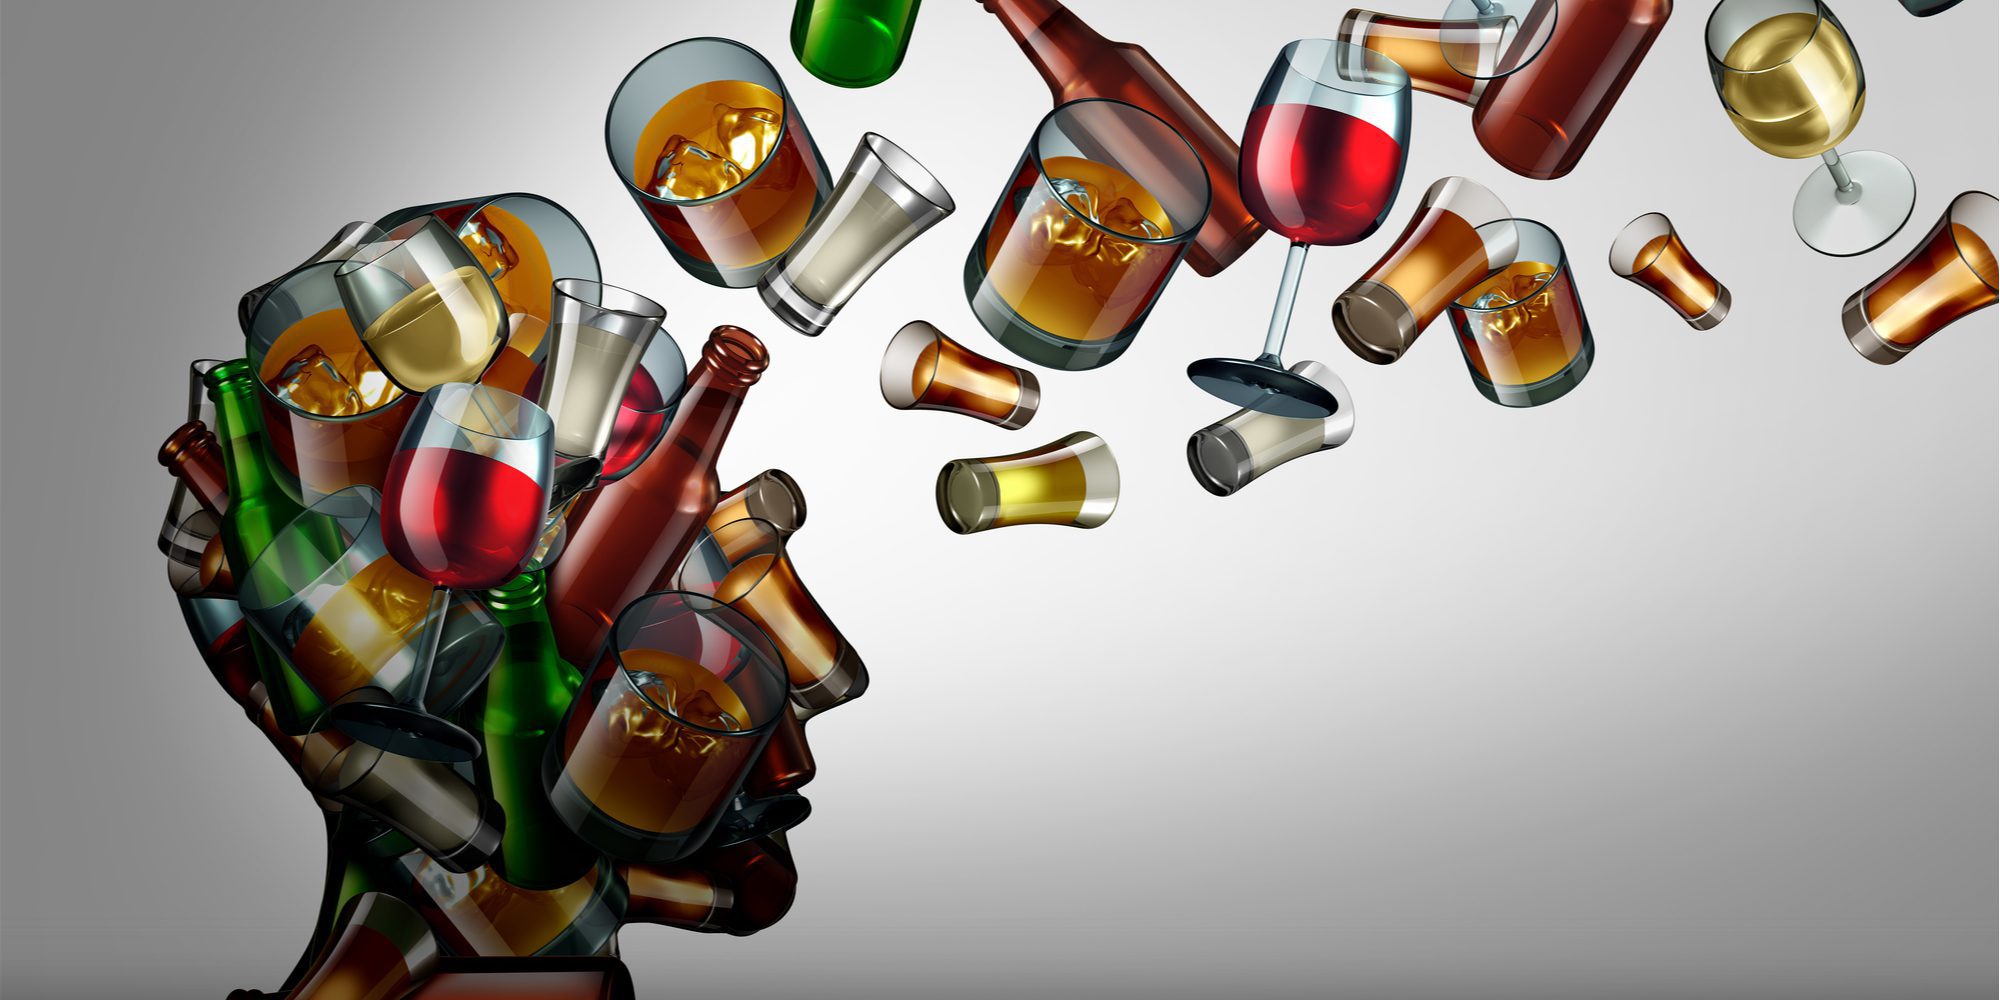 Does Alcohol Cause Cancer? Hidden Dangers You Should Know